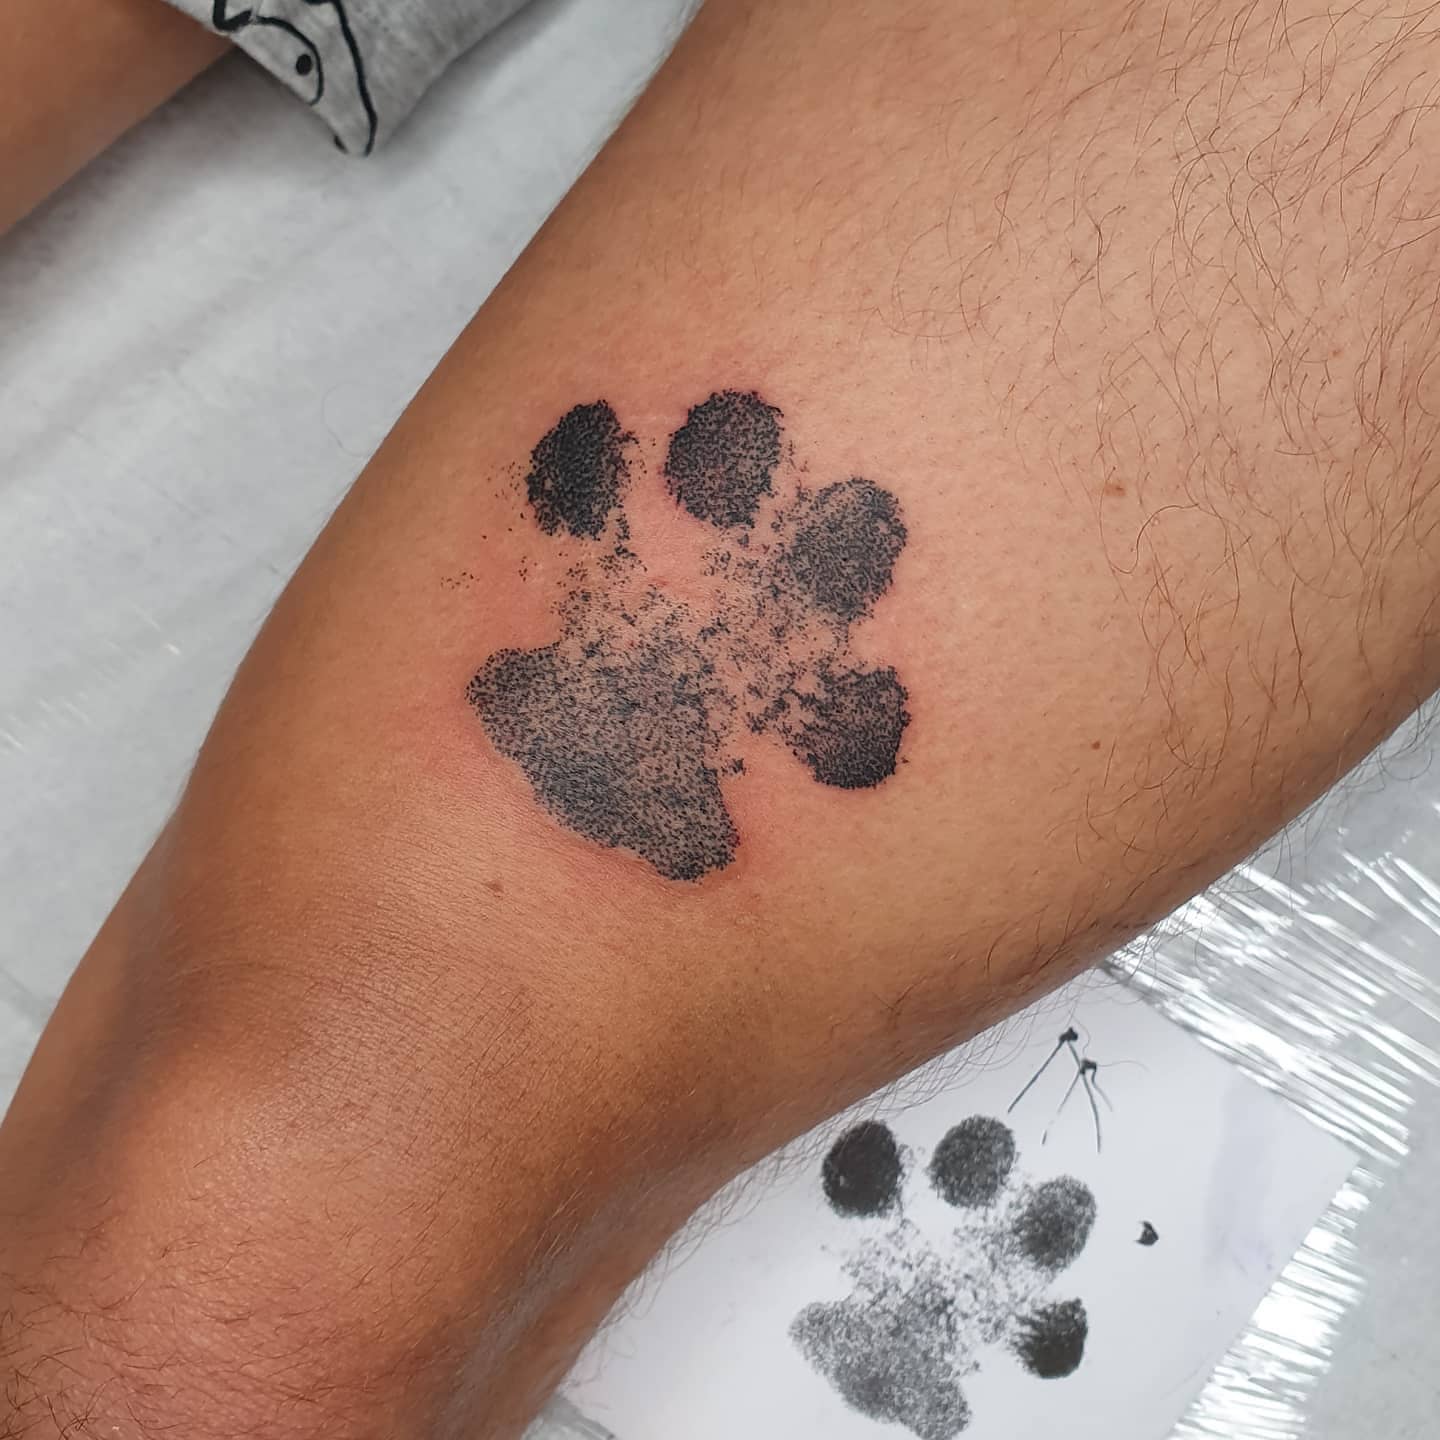 Buy Dog Paw Tattoo Online In India - Etsy India